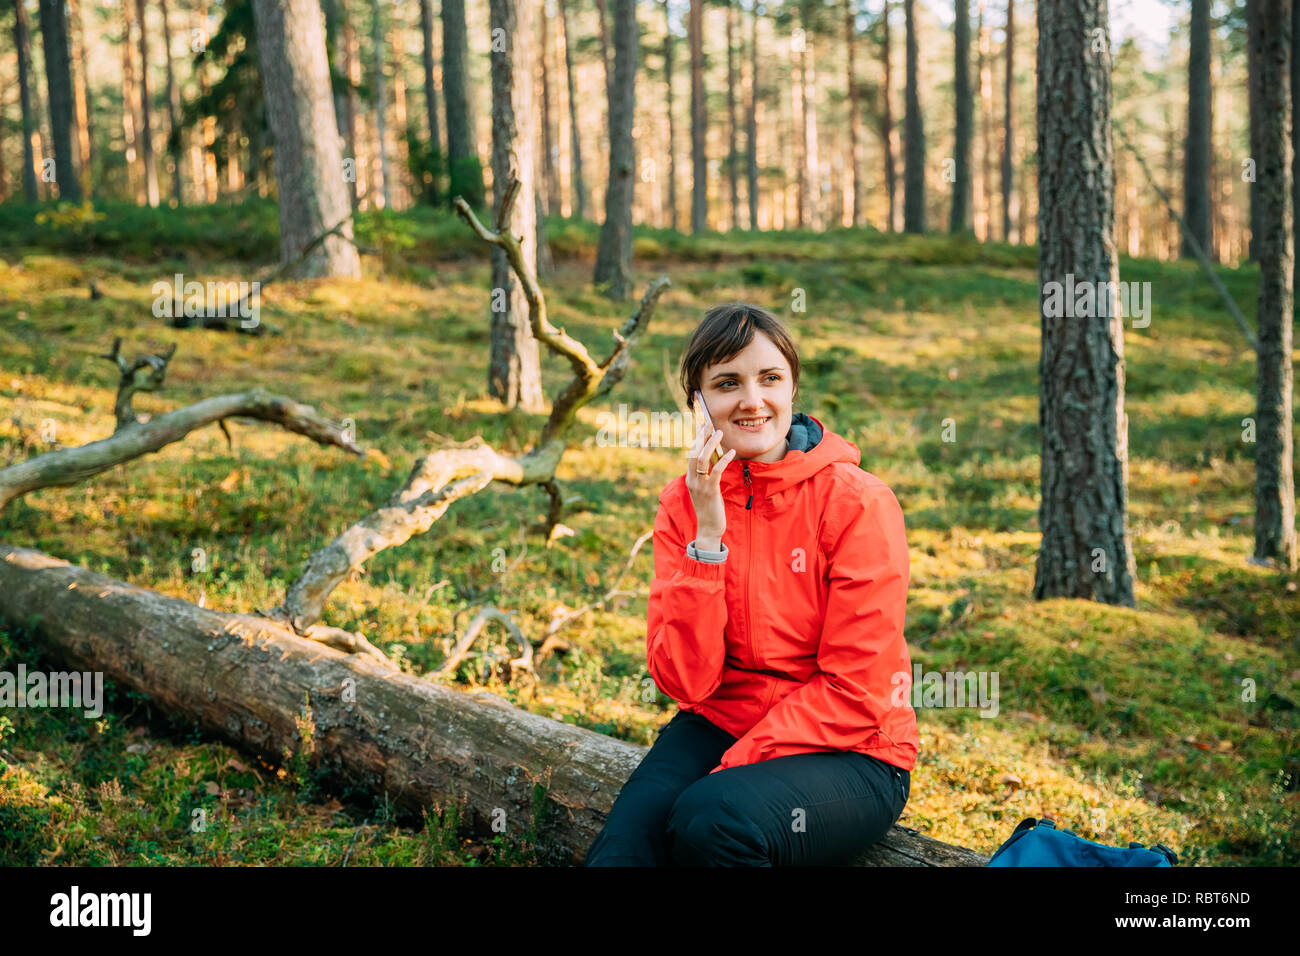 Young Adult Beautiful Caucasian Girl Woman Dressed In Red Jacket Resting Sitting On Fallen Tree And Making Call On Smartphone In Autumn Green Forest.  Stock Photo